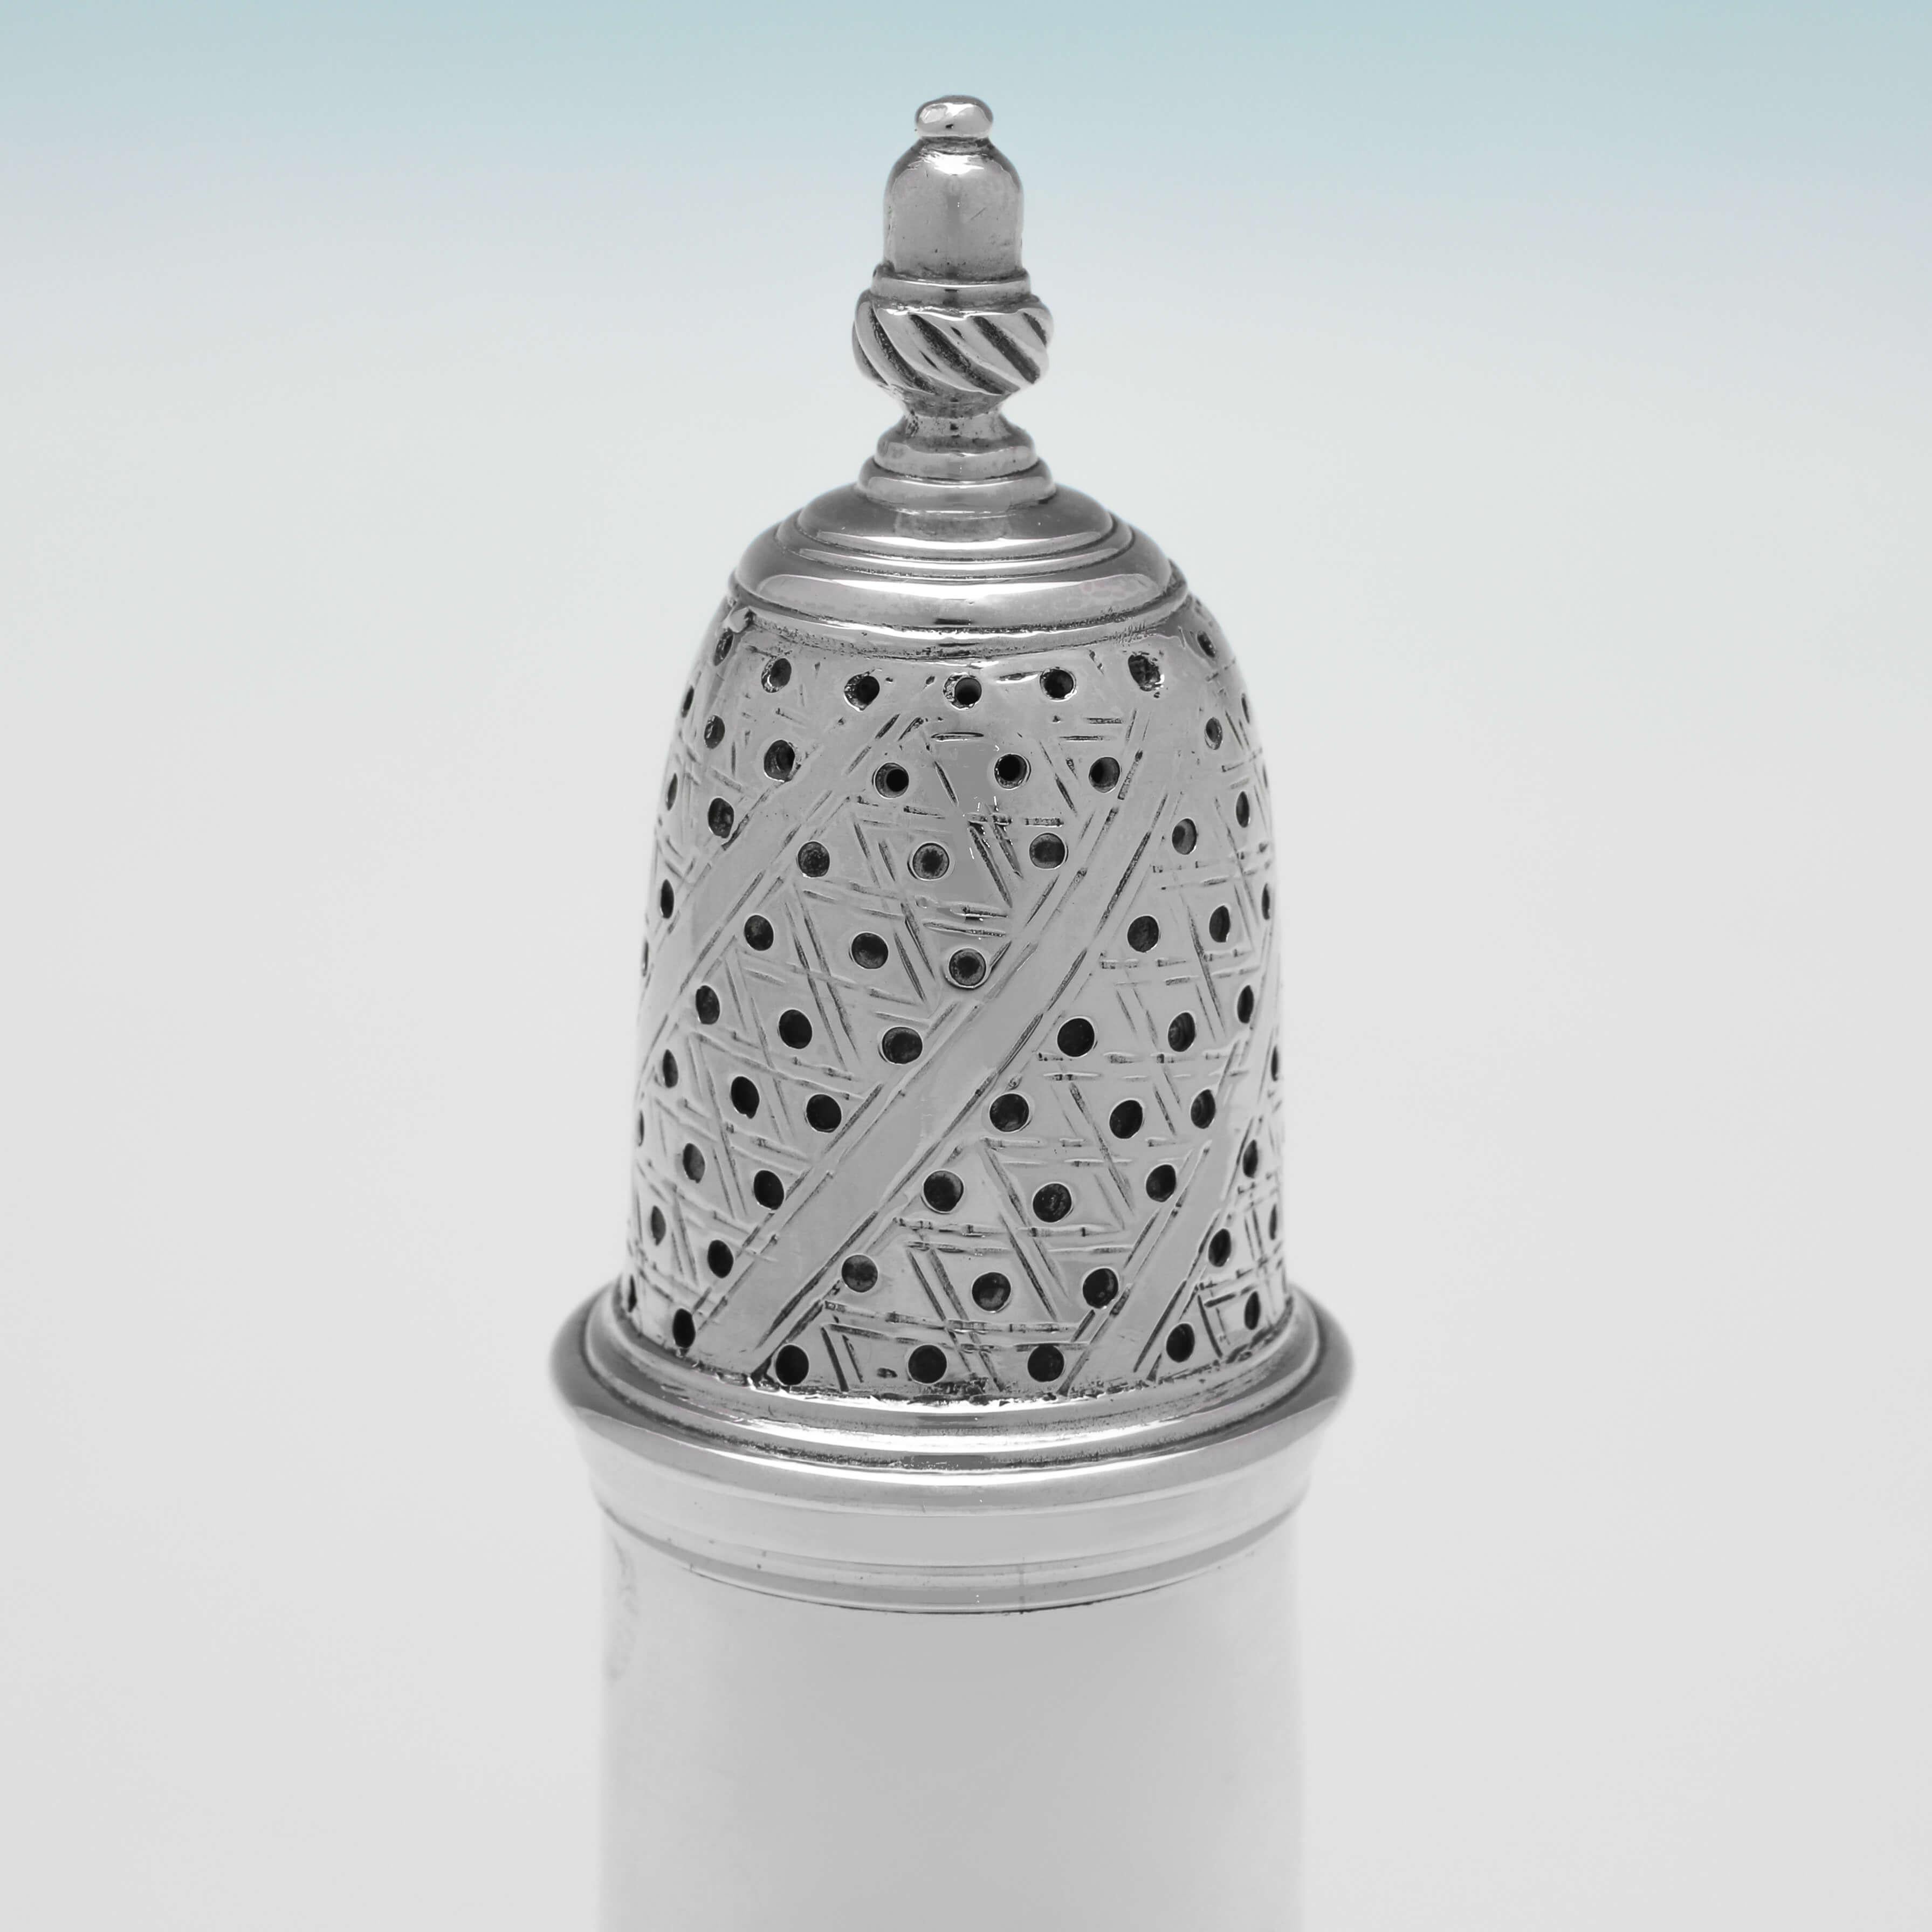 English George III Period Antique Sterling Silver Pepper Pot, London, 1764